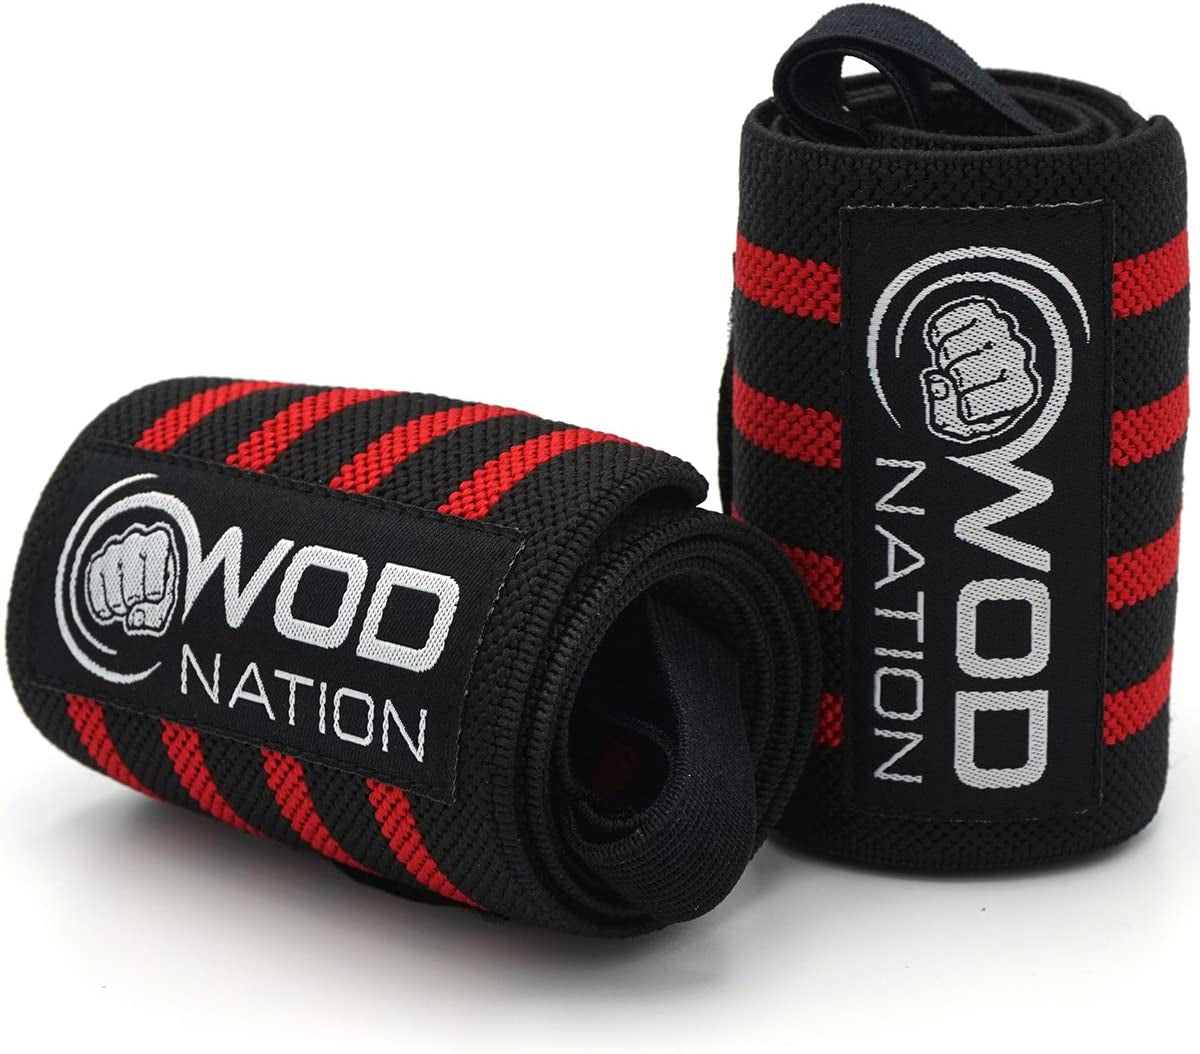 Professional Wrist Wraps & Straps for Gym & Weightlifting (18 Inch) - Essential Weight Lifting Wrist Wraps & Gym Wrist Straps Support for Optimal Powerlifting Performance for Women & Men